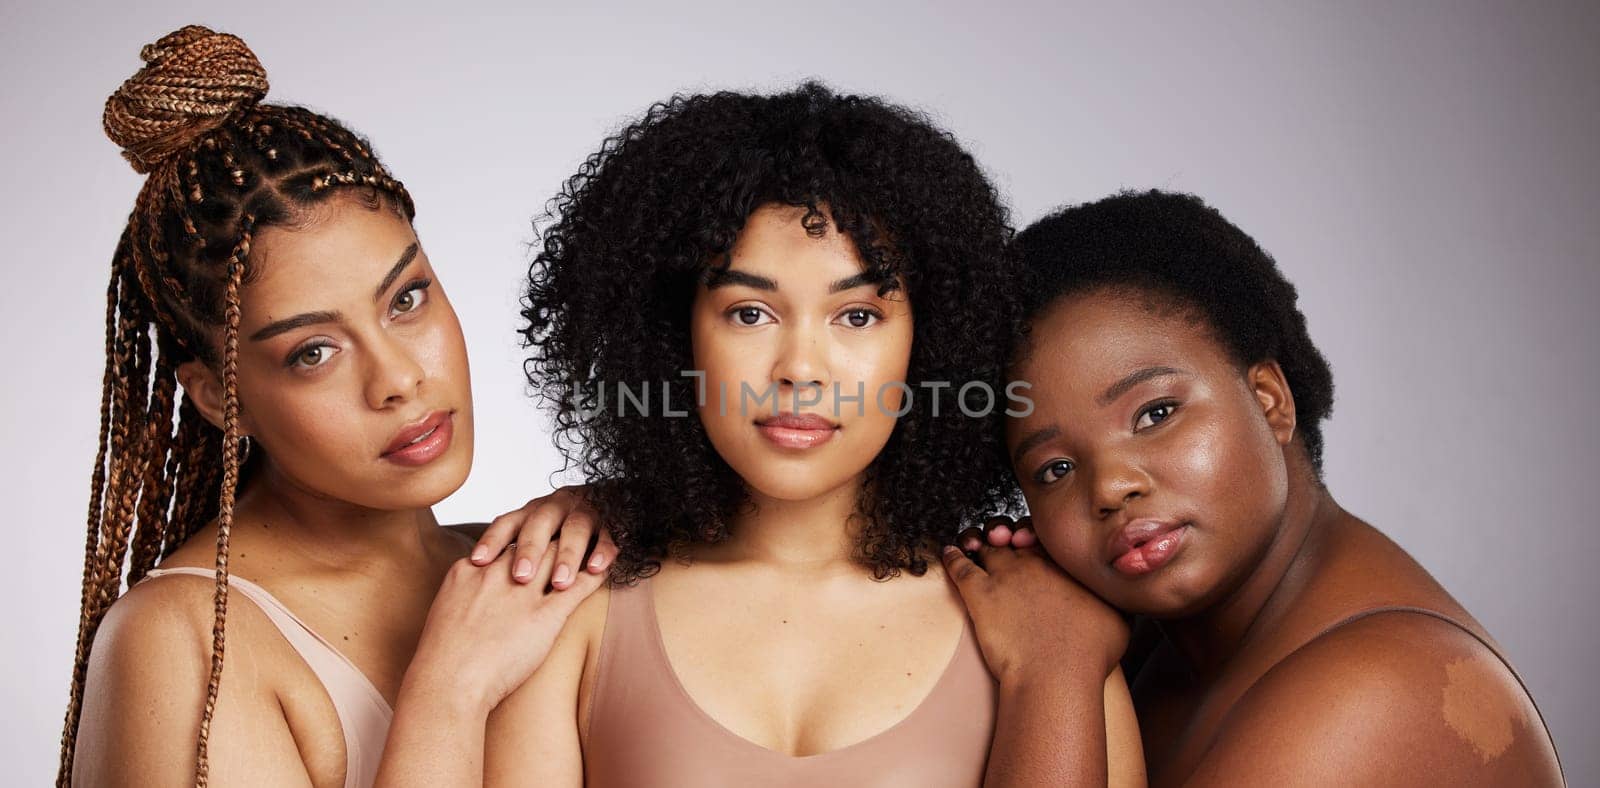 Portrait, skincare and diversity with woman friends in studio on a gray background together for beauty. Face, makeup and natural with a female model group posing to promote support or inclusion by YuriArcurs